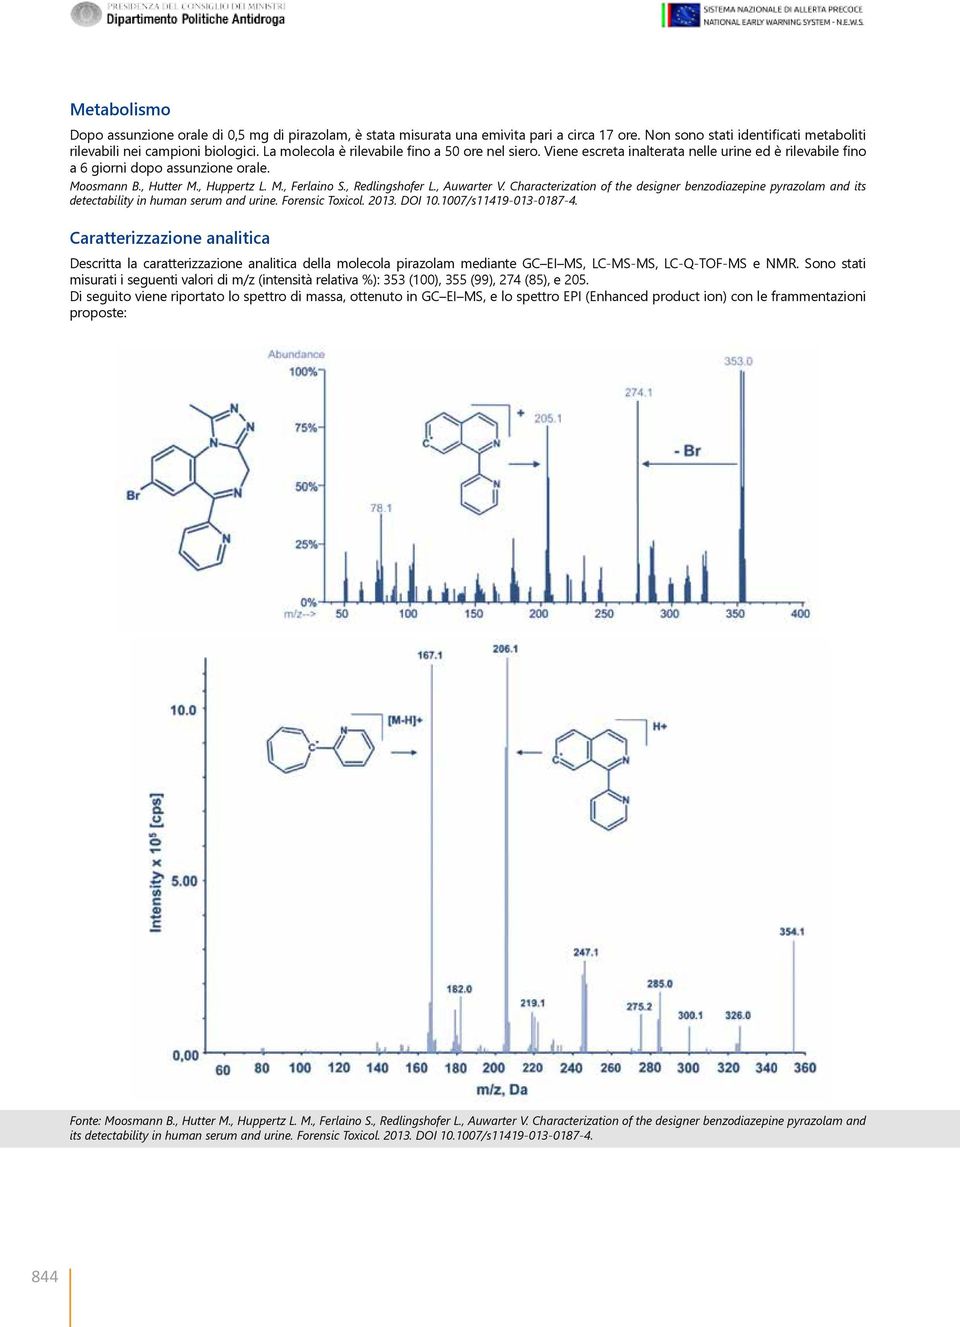 , Redlingshofer L., Auwarter V. Characterization of the designer benzodiazepine pyrazolam and its detectability in human serum and urine. Forensic Toxicol. 2013. DOI 10.1007/s11419-013-0187-4.